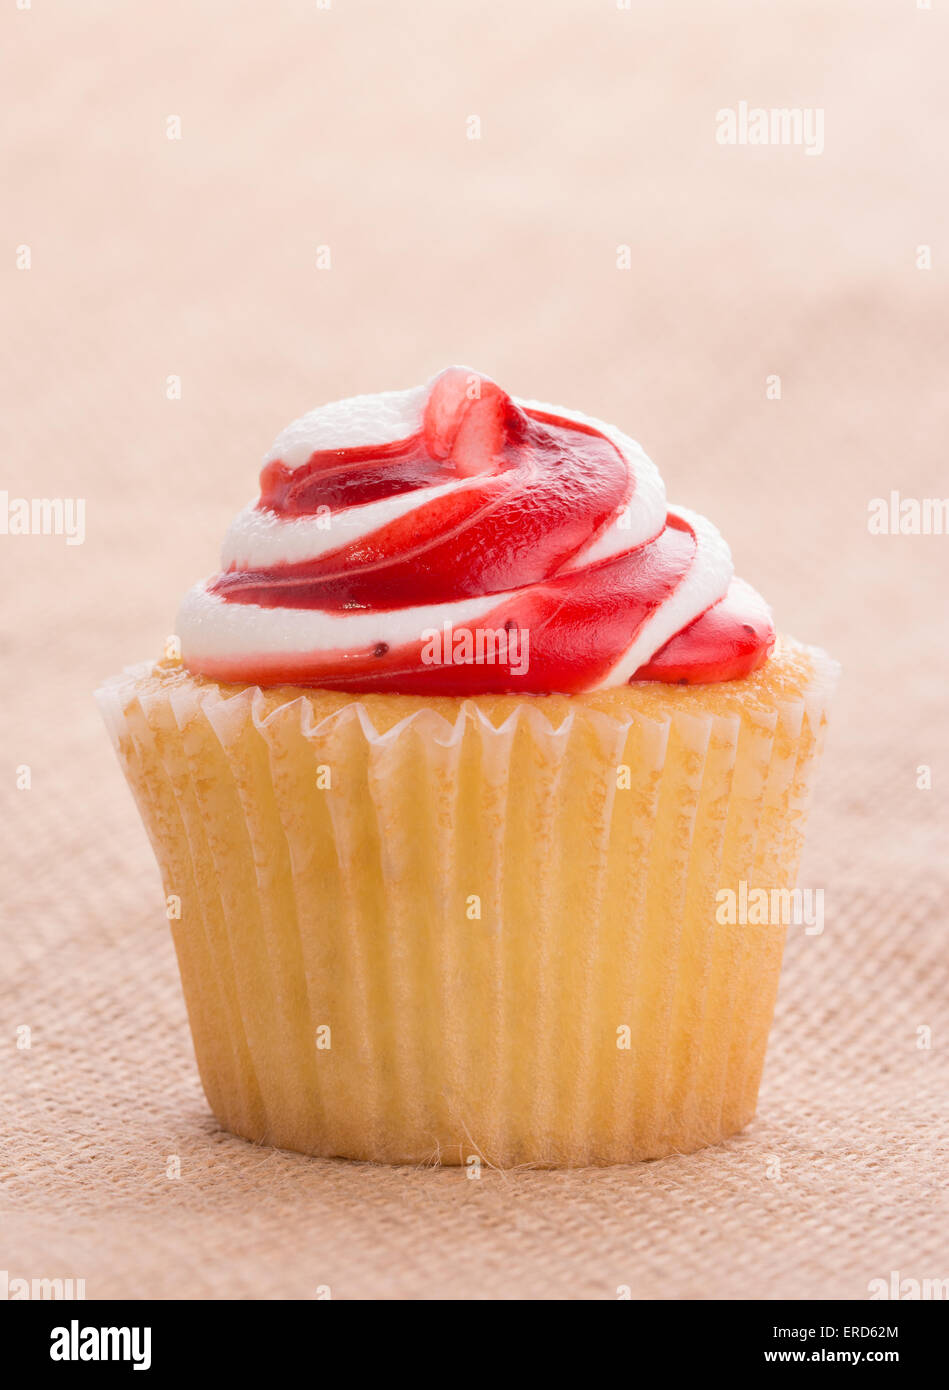 Delicious red and white swirly top strawberry cupcake on simple burlap background Stock Photo